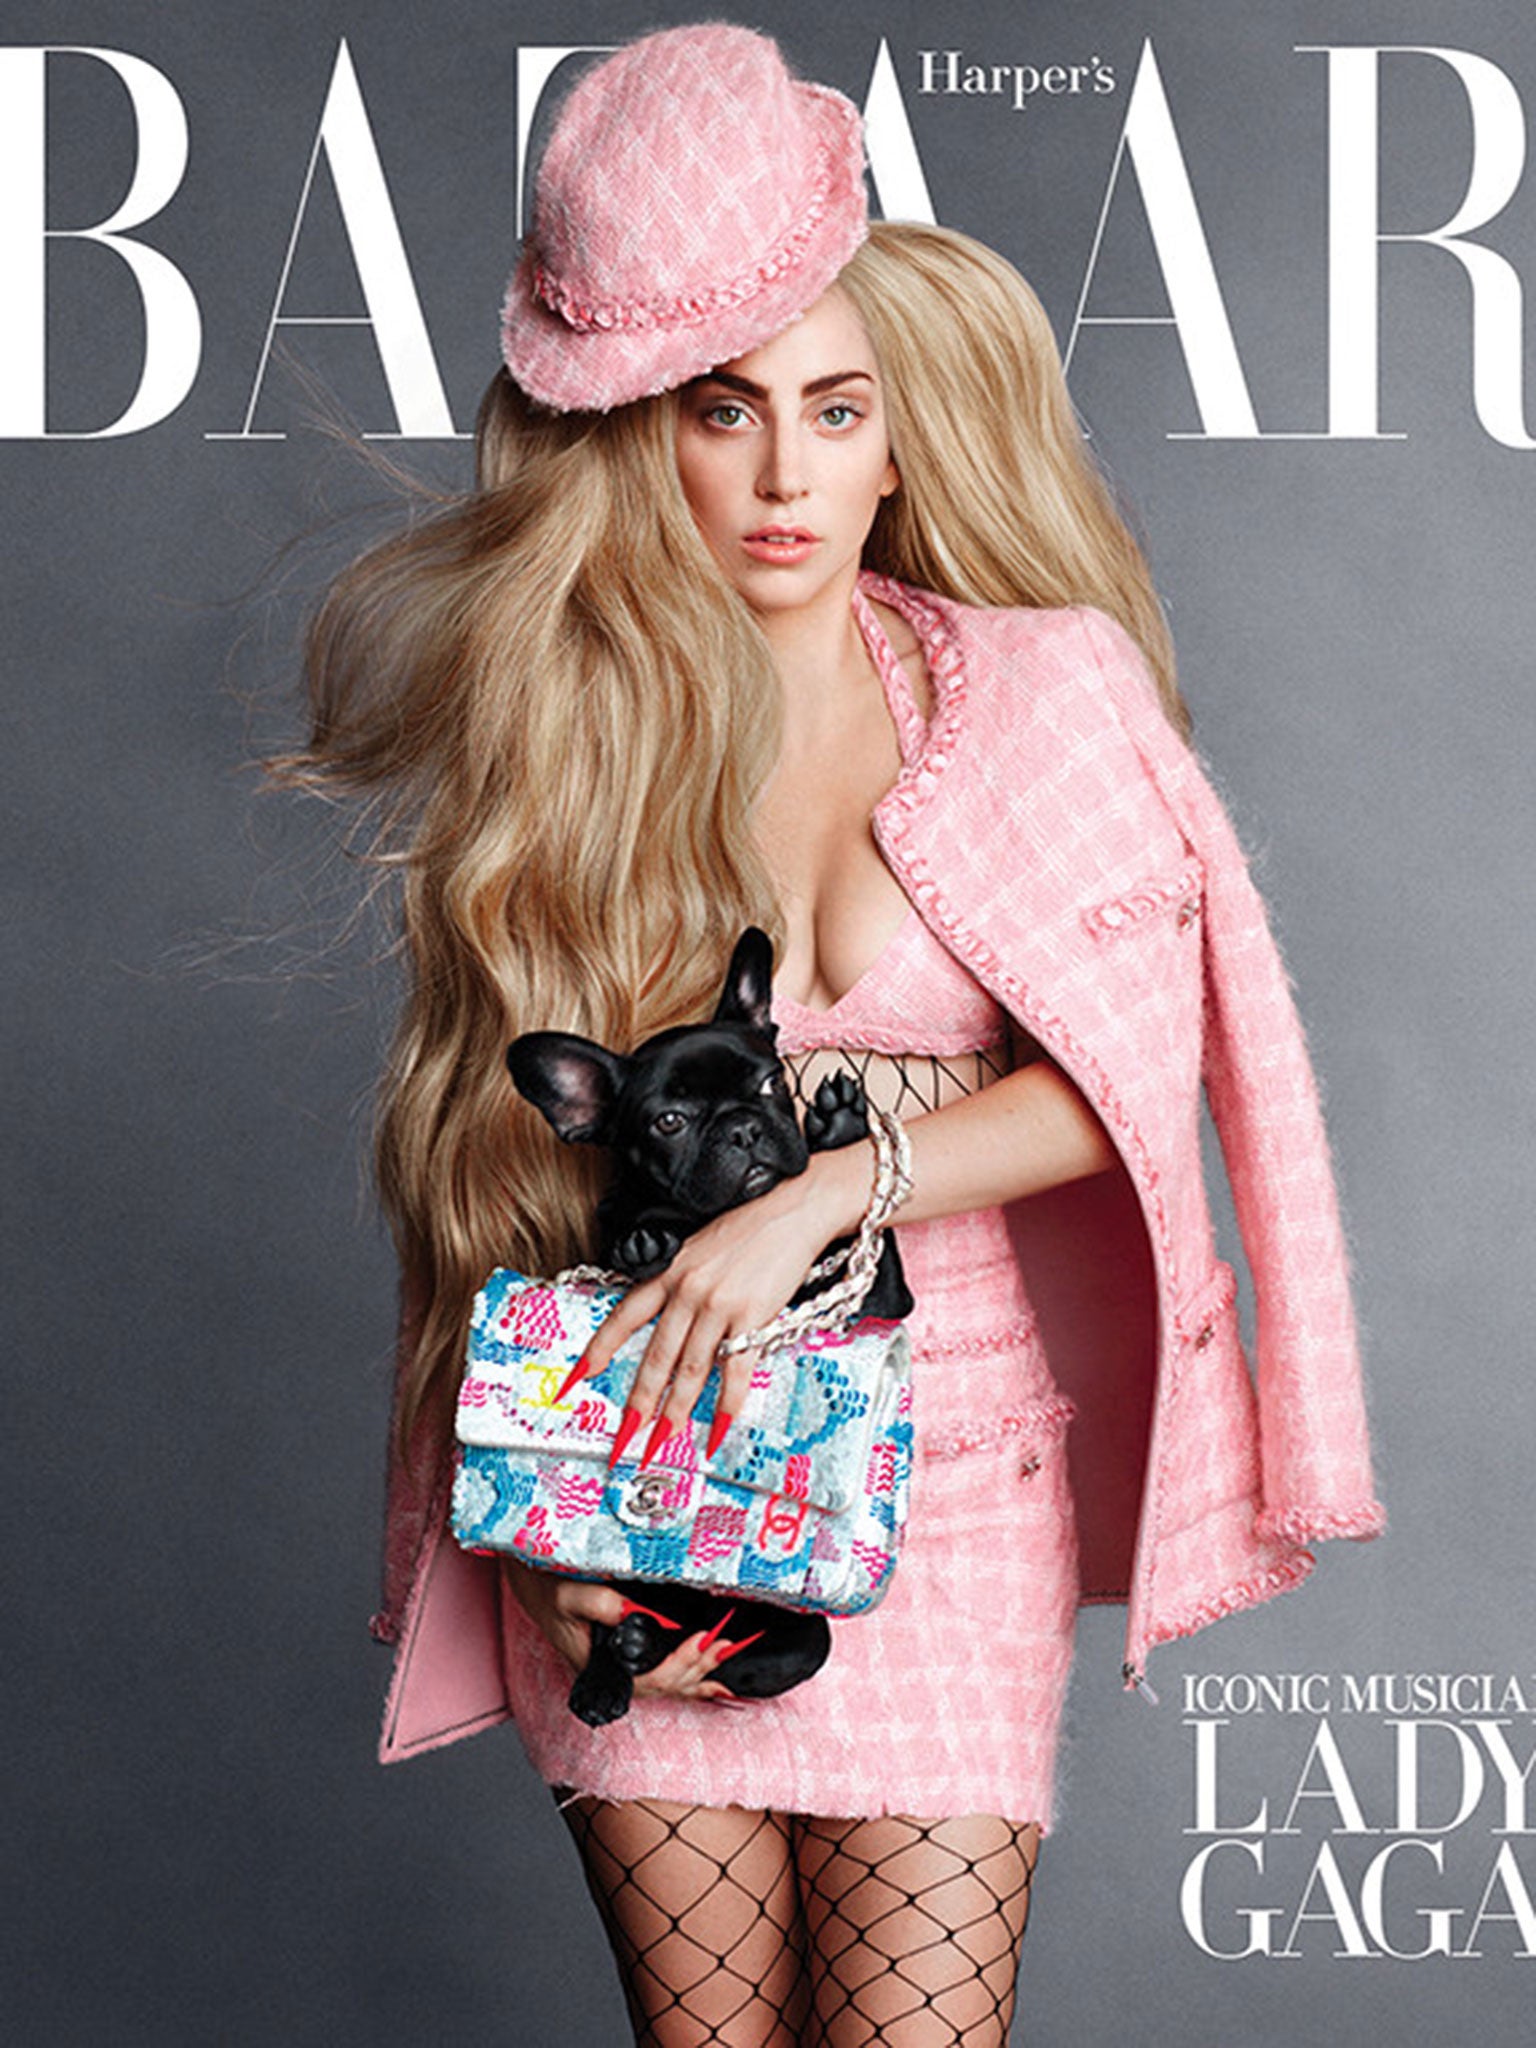 Lady Gaga on the cover of Harper's Bazaar's September issue, posing with her dog